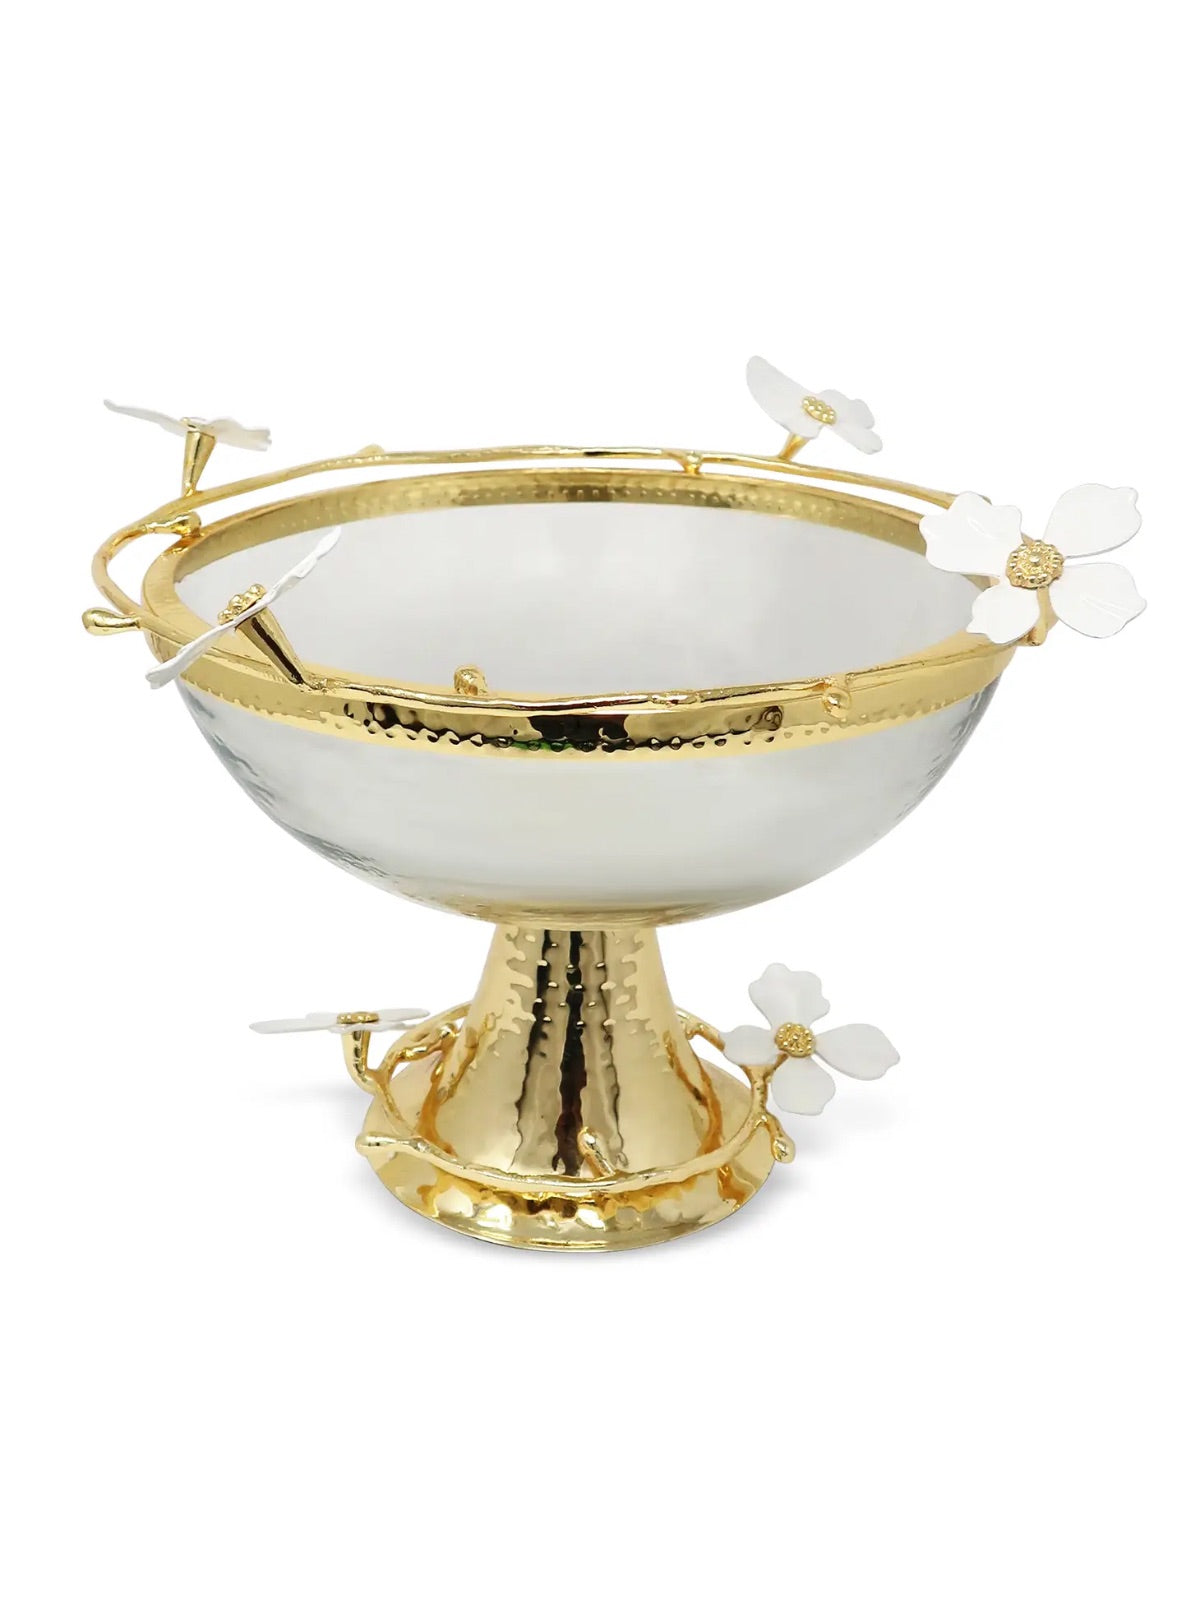 10D Gold Footed Glass Bowl with Luxurious Jewel Flowers Design